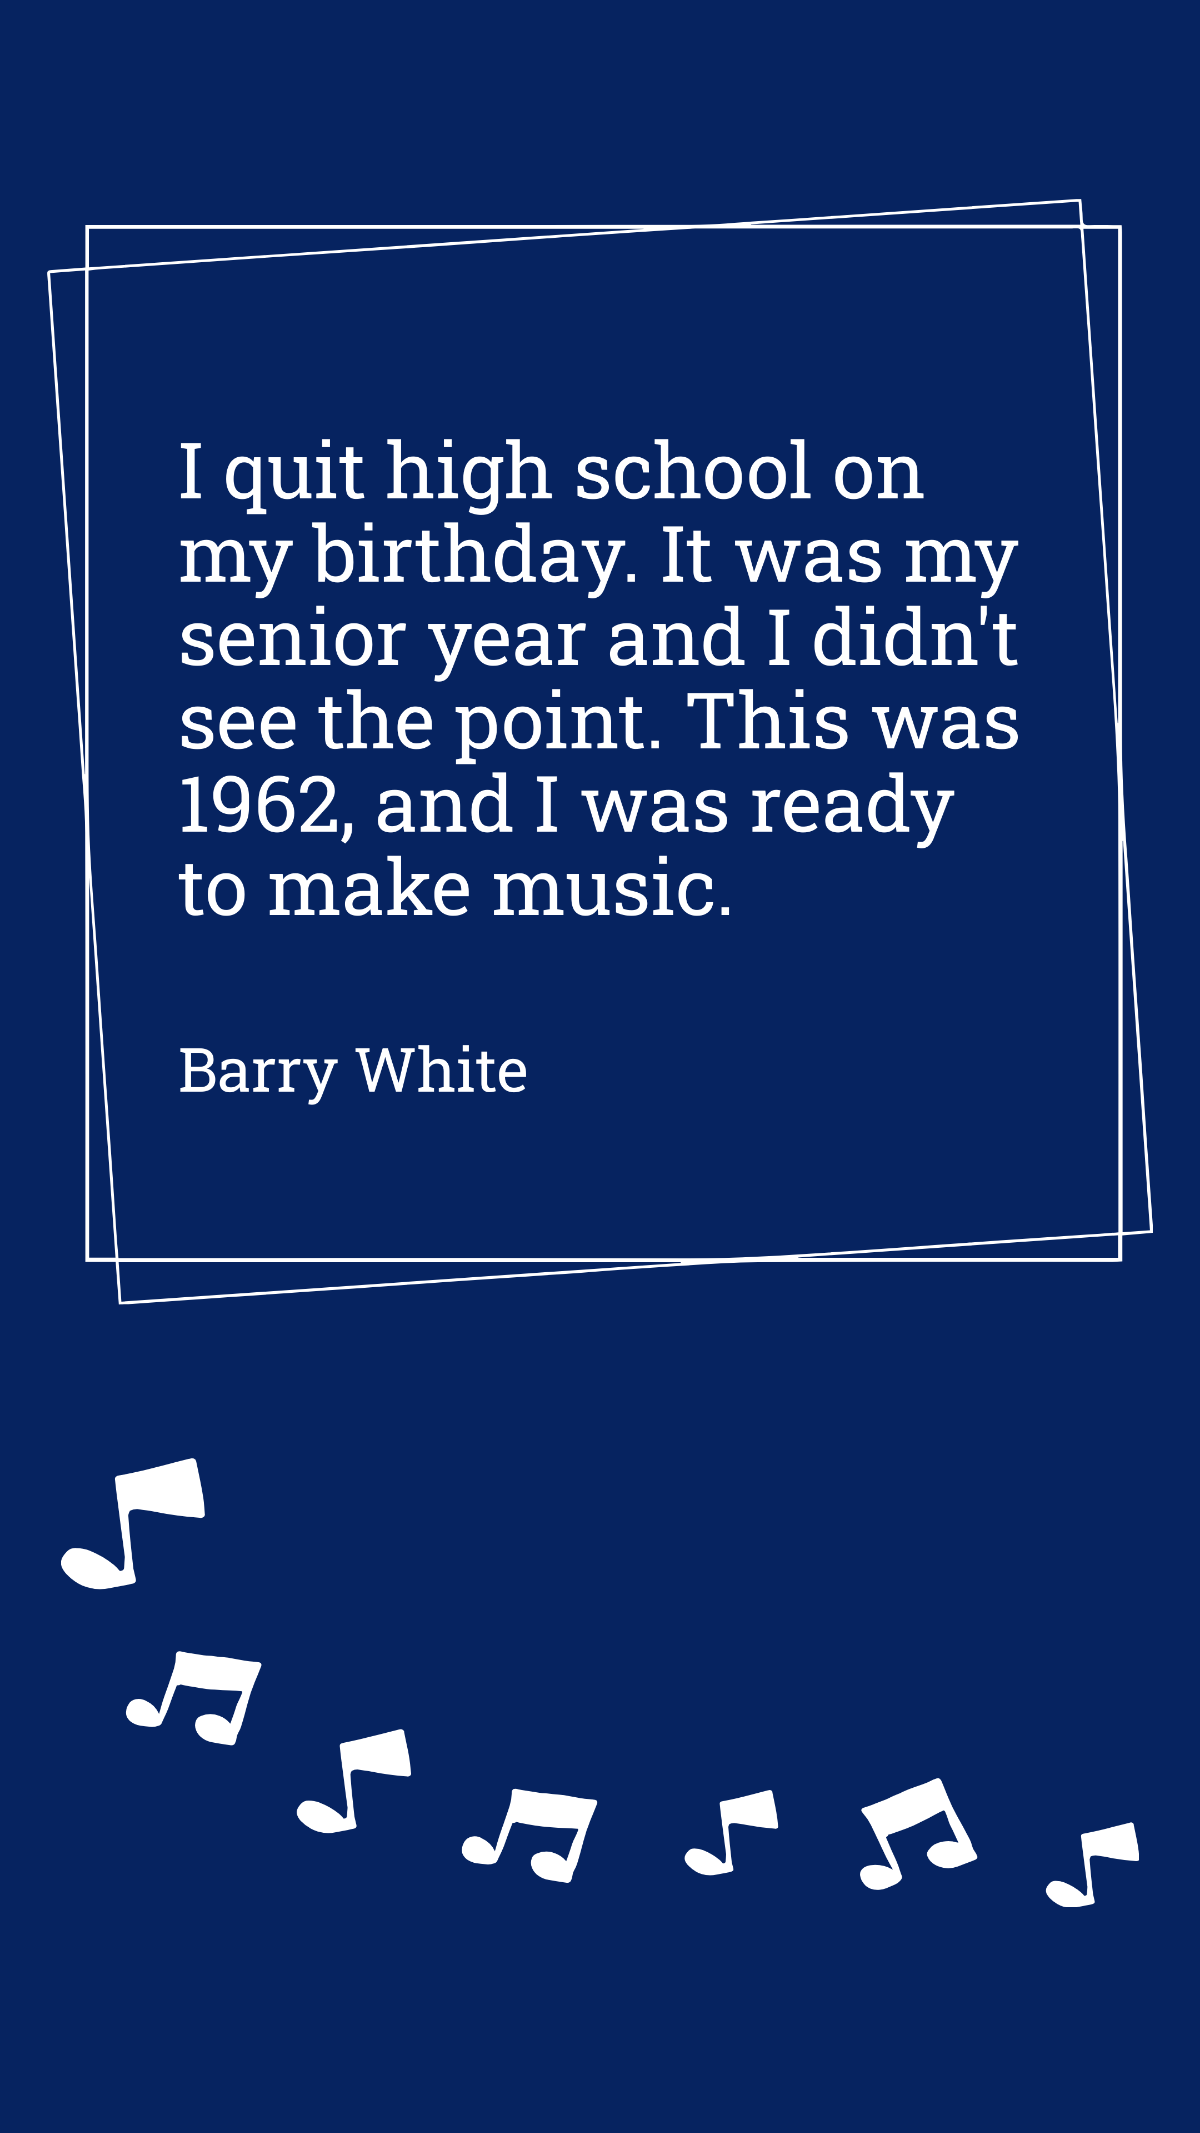 Barry White - I quit high school on my birthday. It was my senior year and I didn't see the point. This was 1962, and I was ready to make music. Template